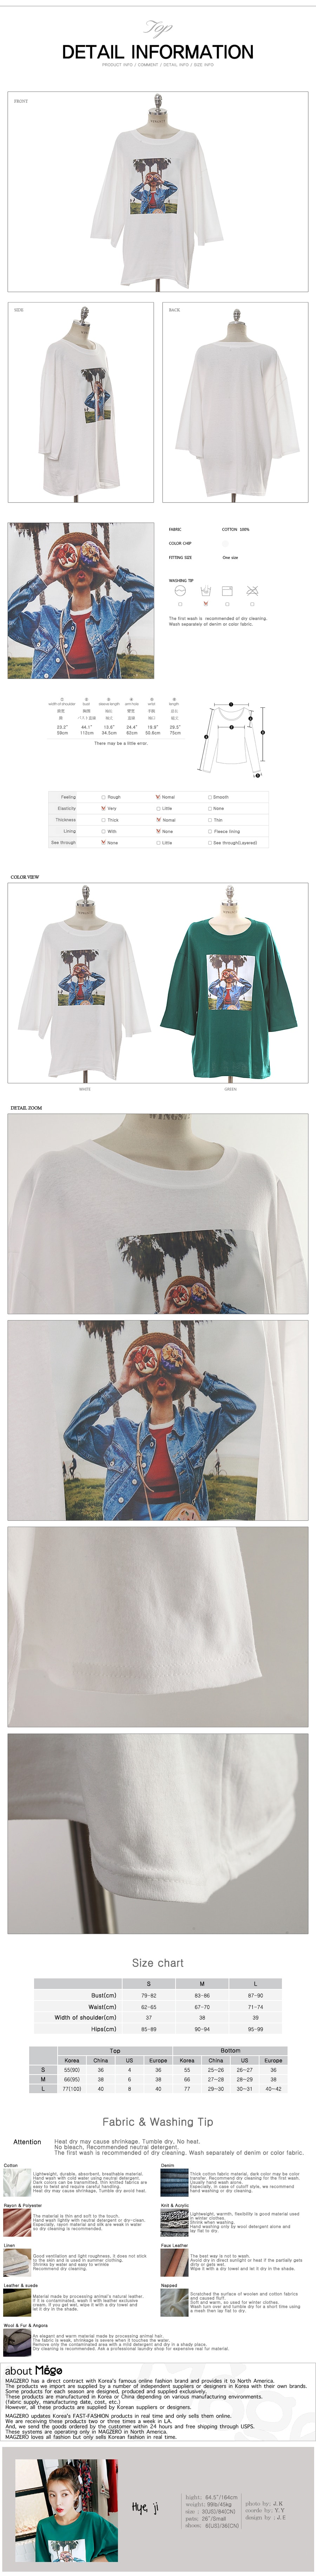 [New Arrival] Donut Graphic Boxy T-shirt White One Size(Free)